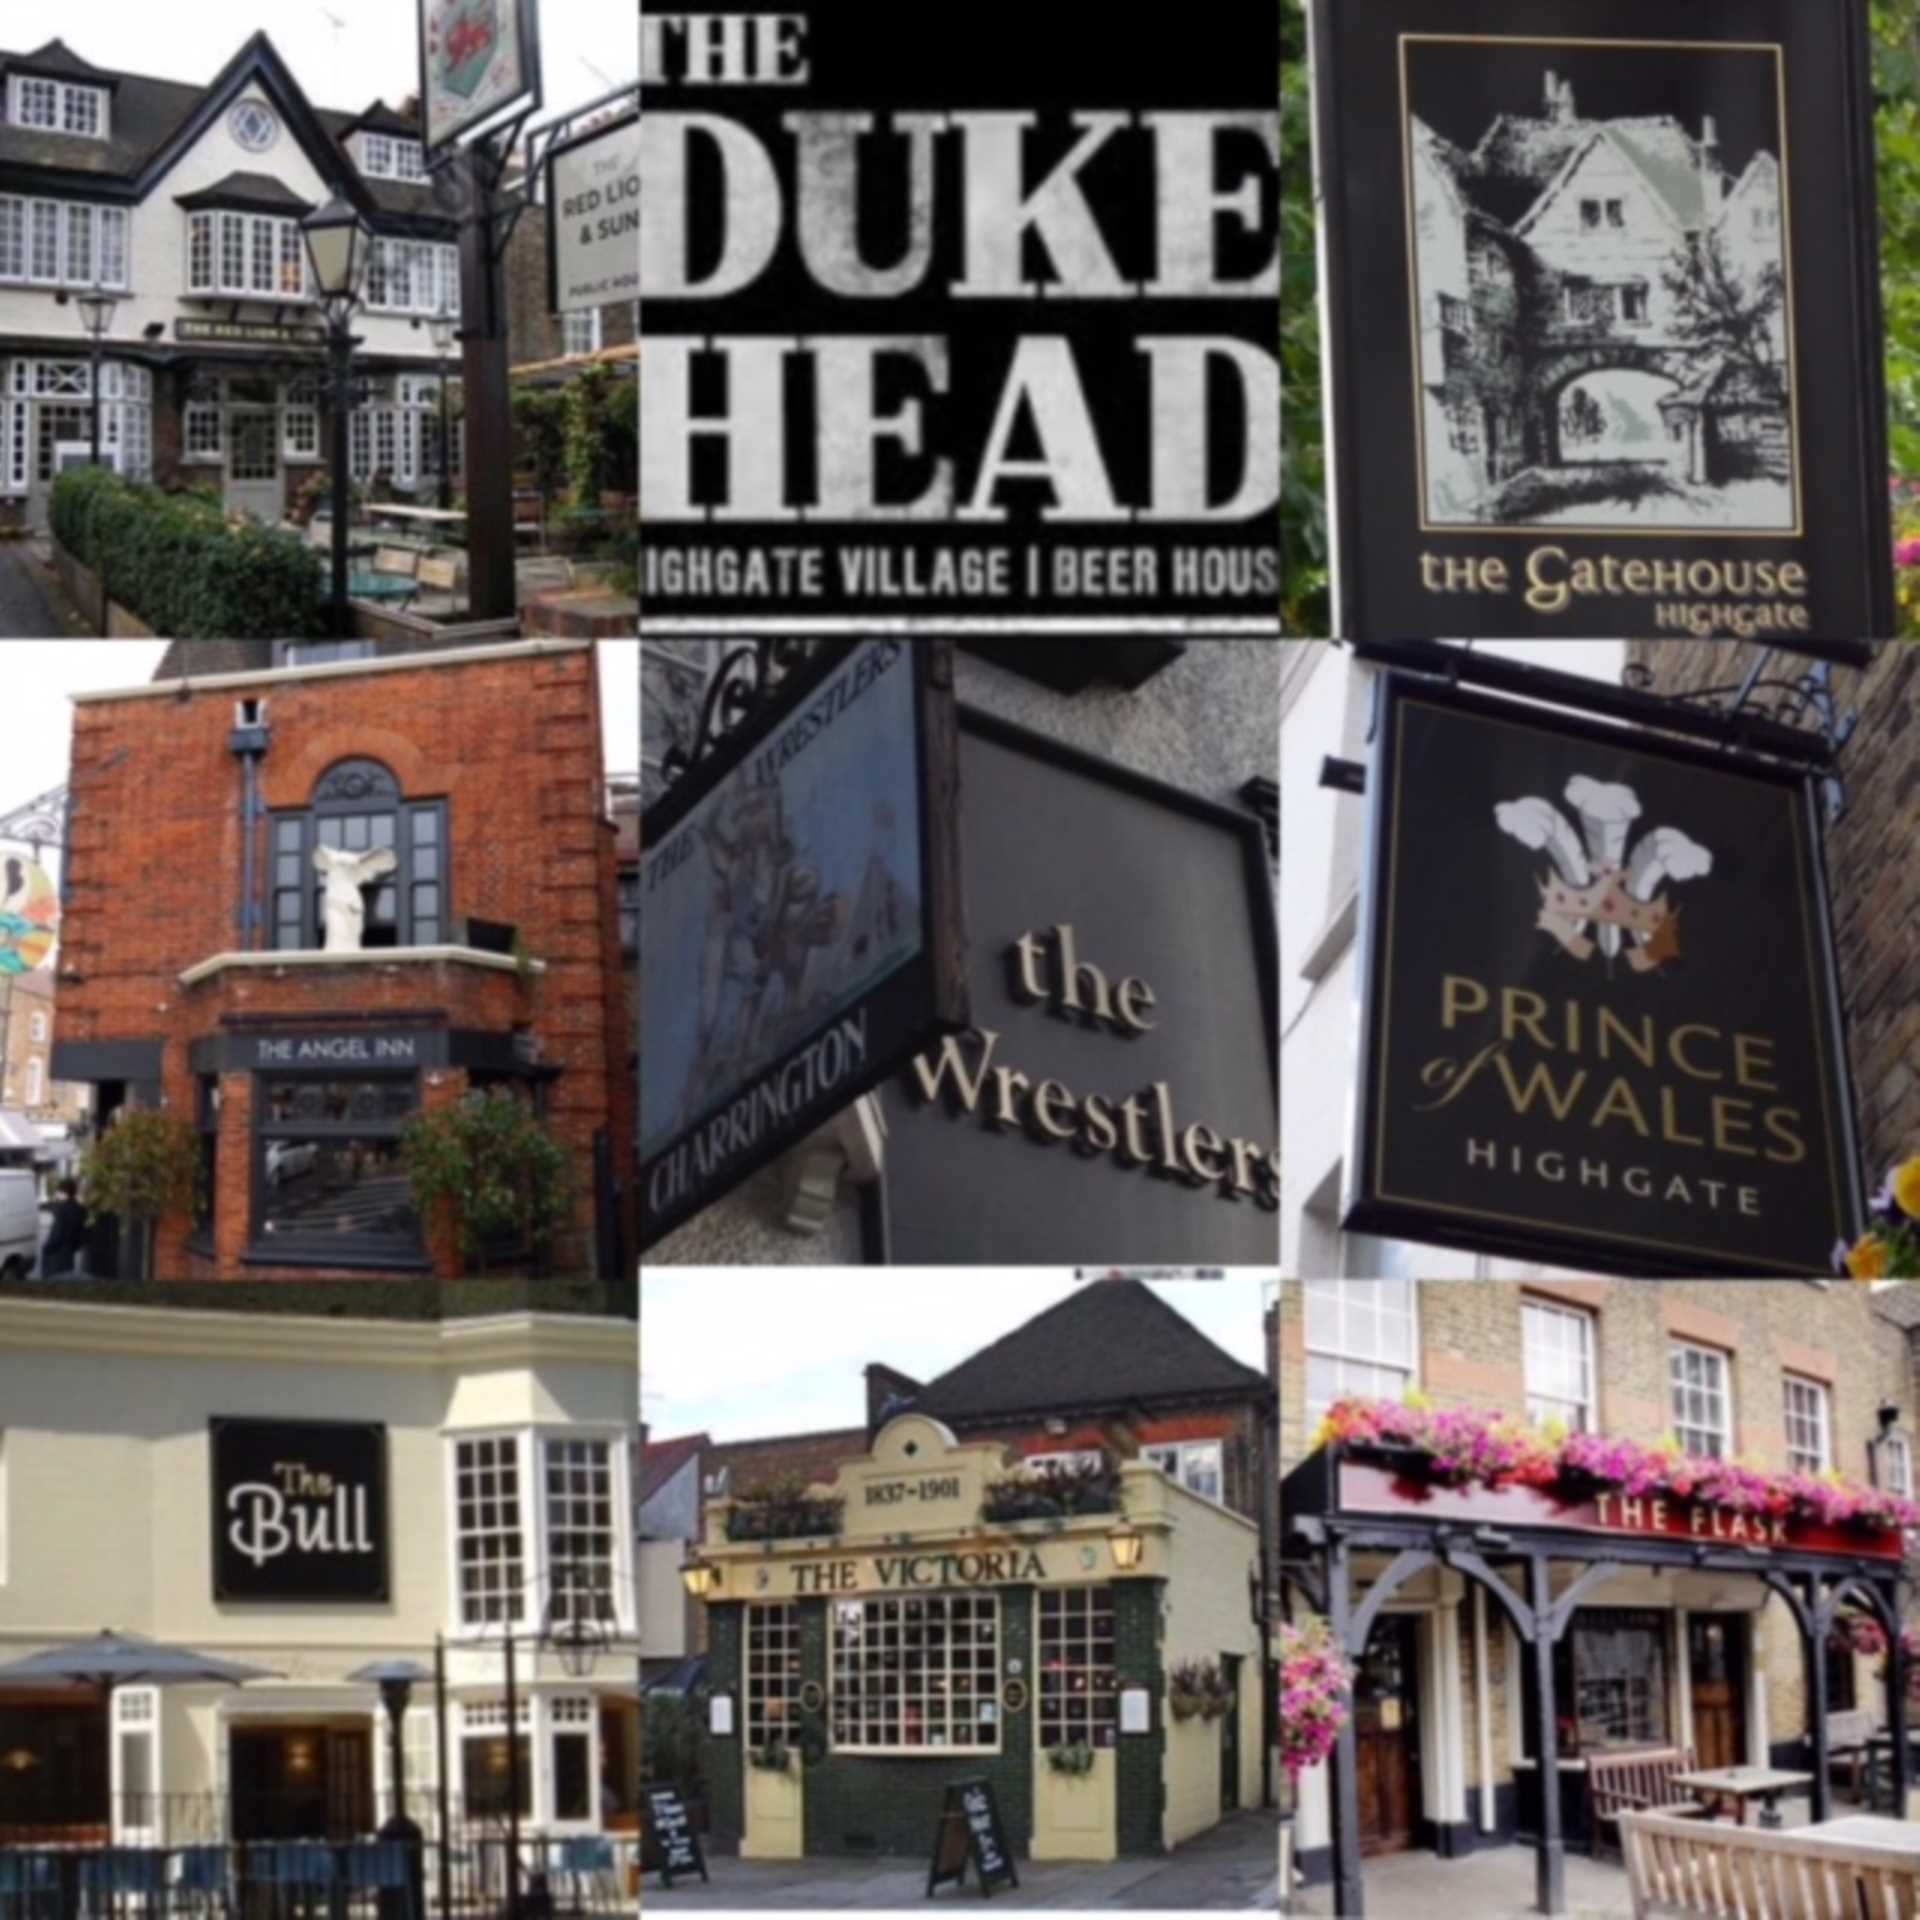 10 Reasons To Move To Highgate - Day 10 - Pubs